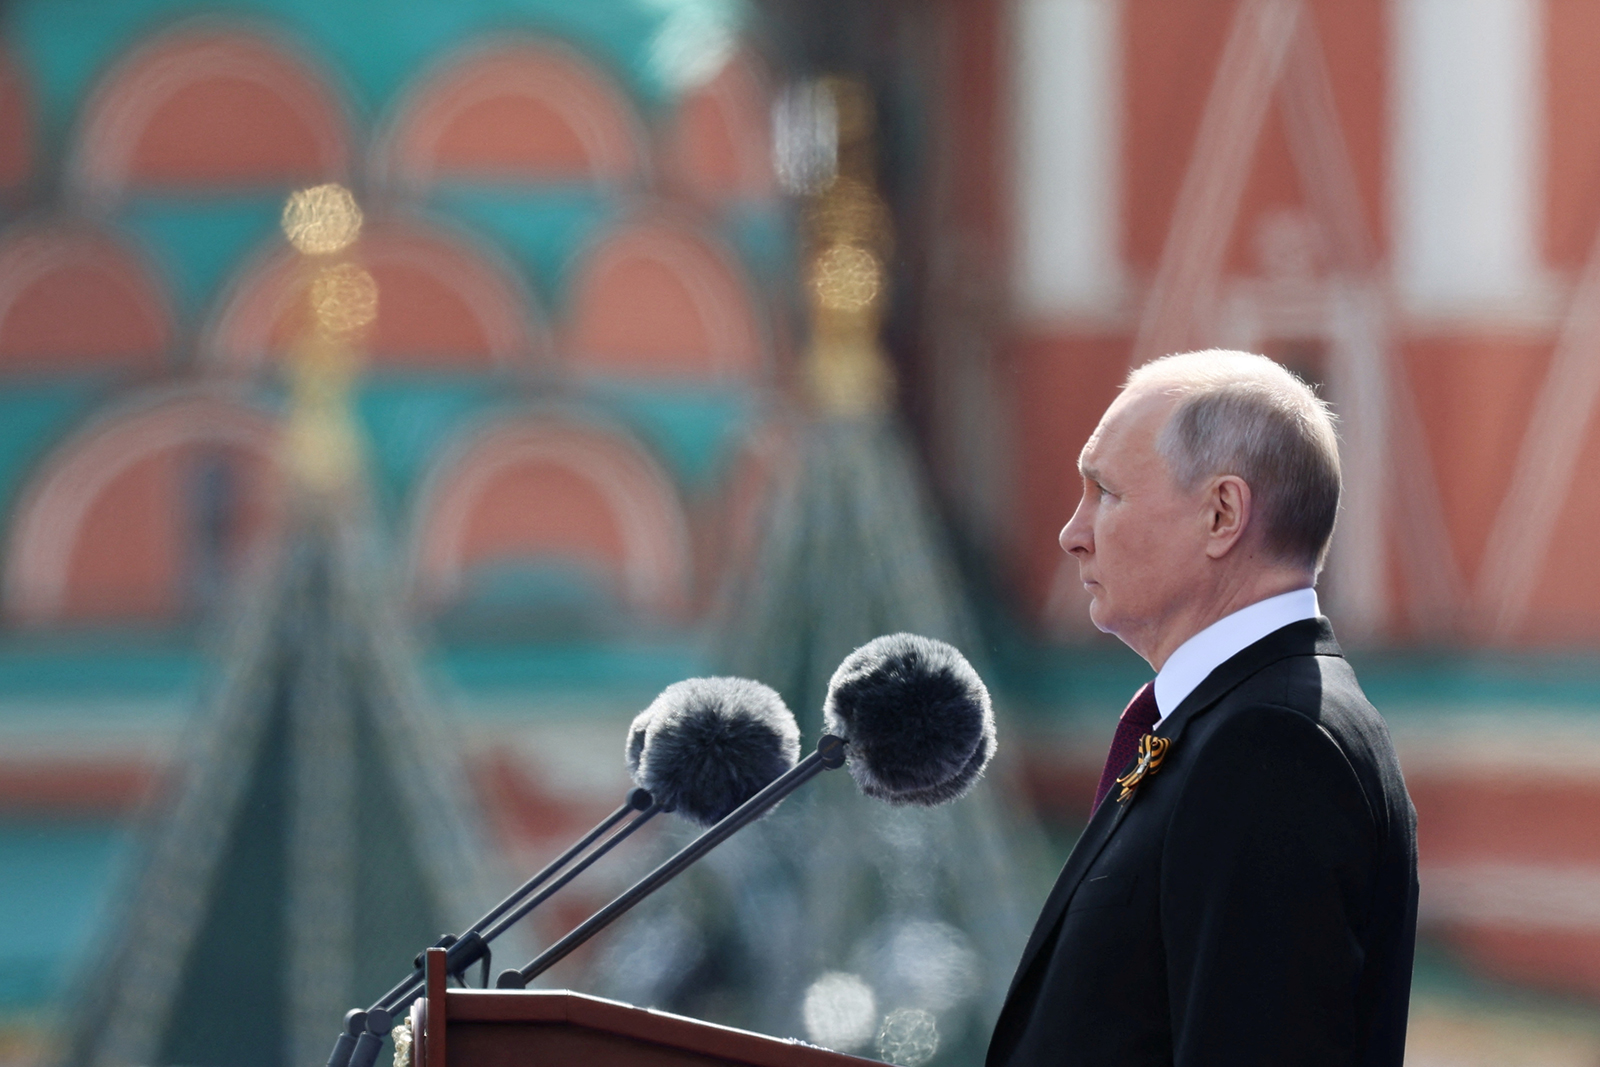 Vladimir Putin delivers a speech during a military parade on Victory Day, which marks the 78th anniversary of the victory over Nazi Germany in World War Two, in Red Square in central Moscow, on May 9.